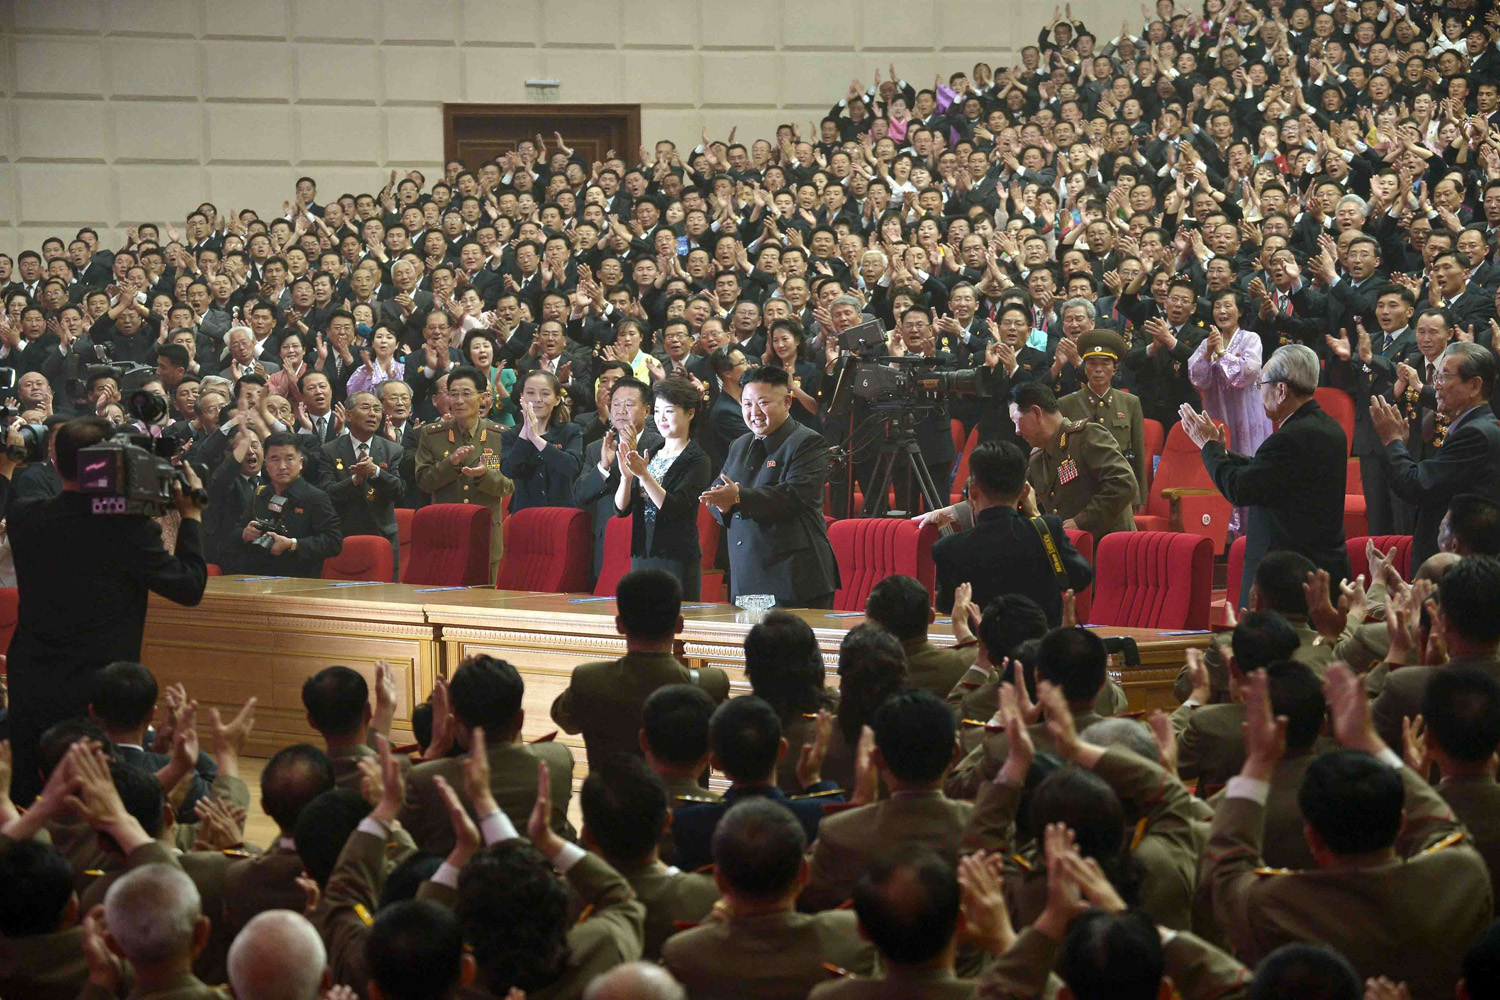 May 20, 2014. North Korean leader Kim Jong Un (C) accompanied by his wife Ri Sol Ju (centre L) applaud as they attend an art performance by the Moranbong Band at the  House of Culture in Pyongyang.